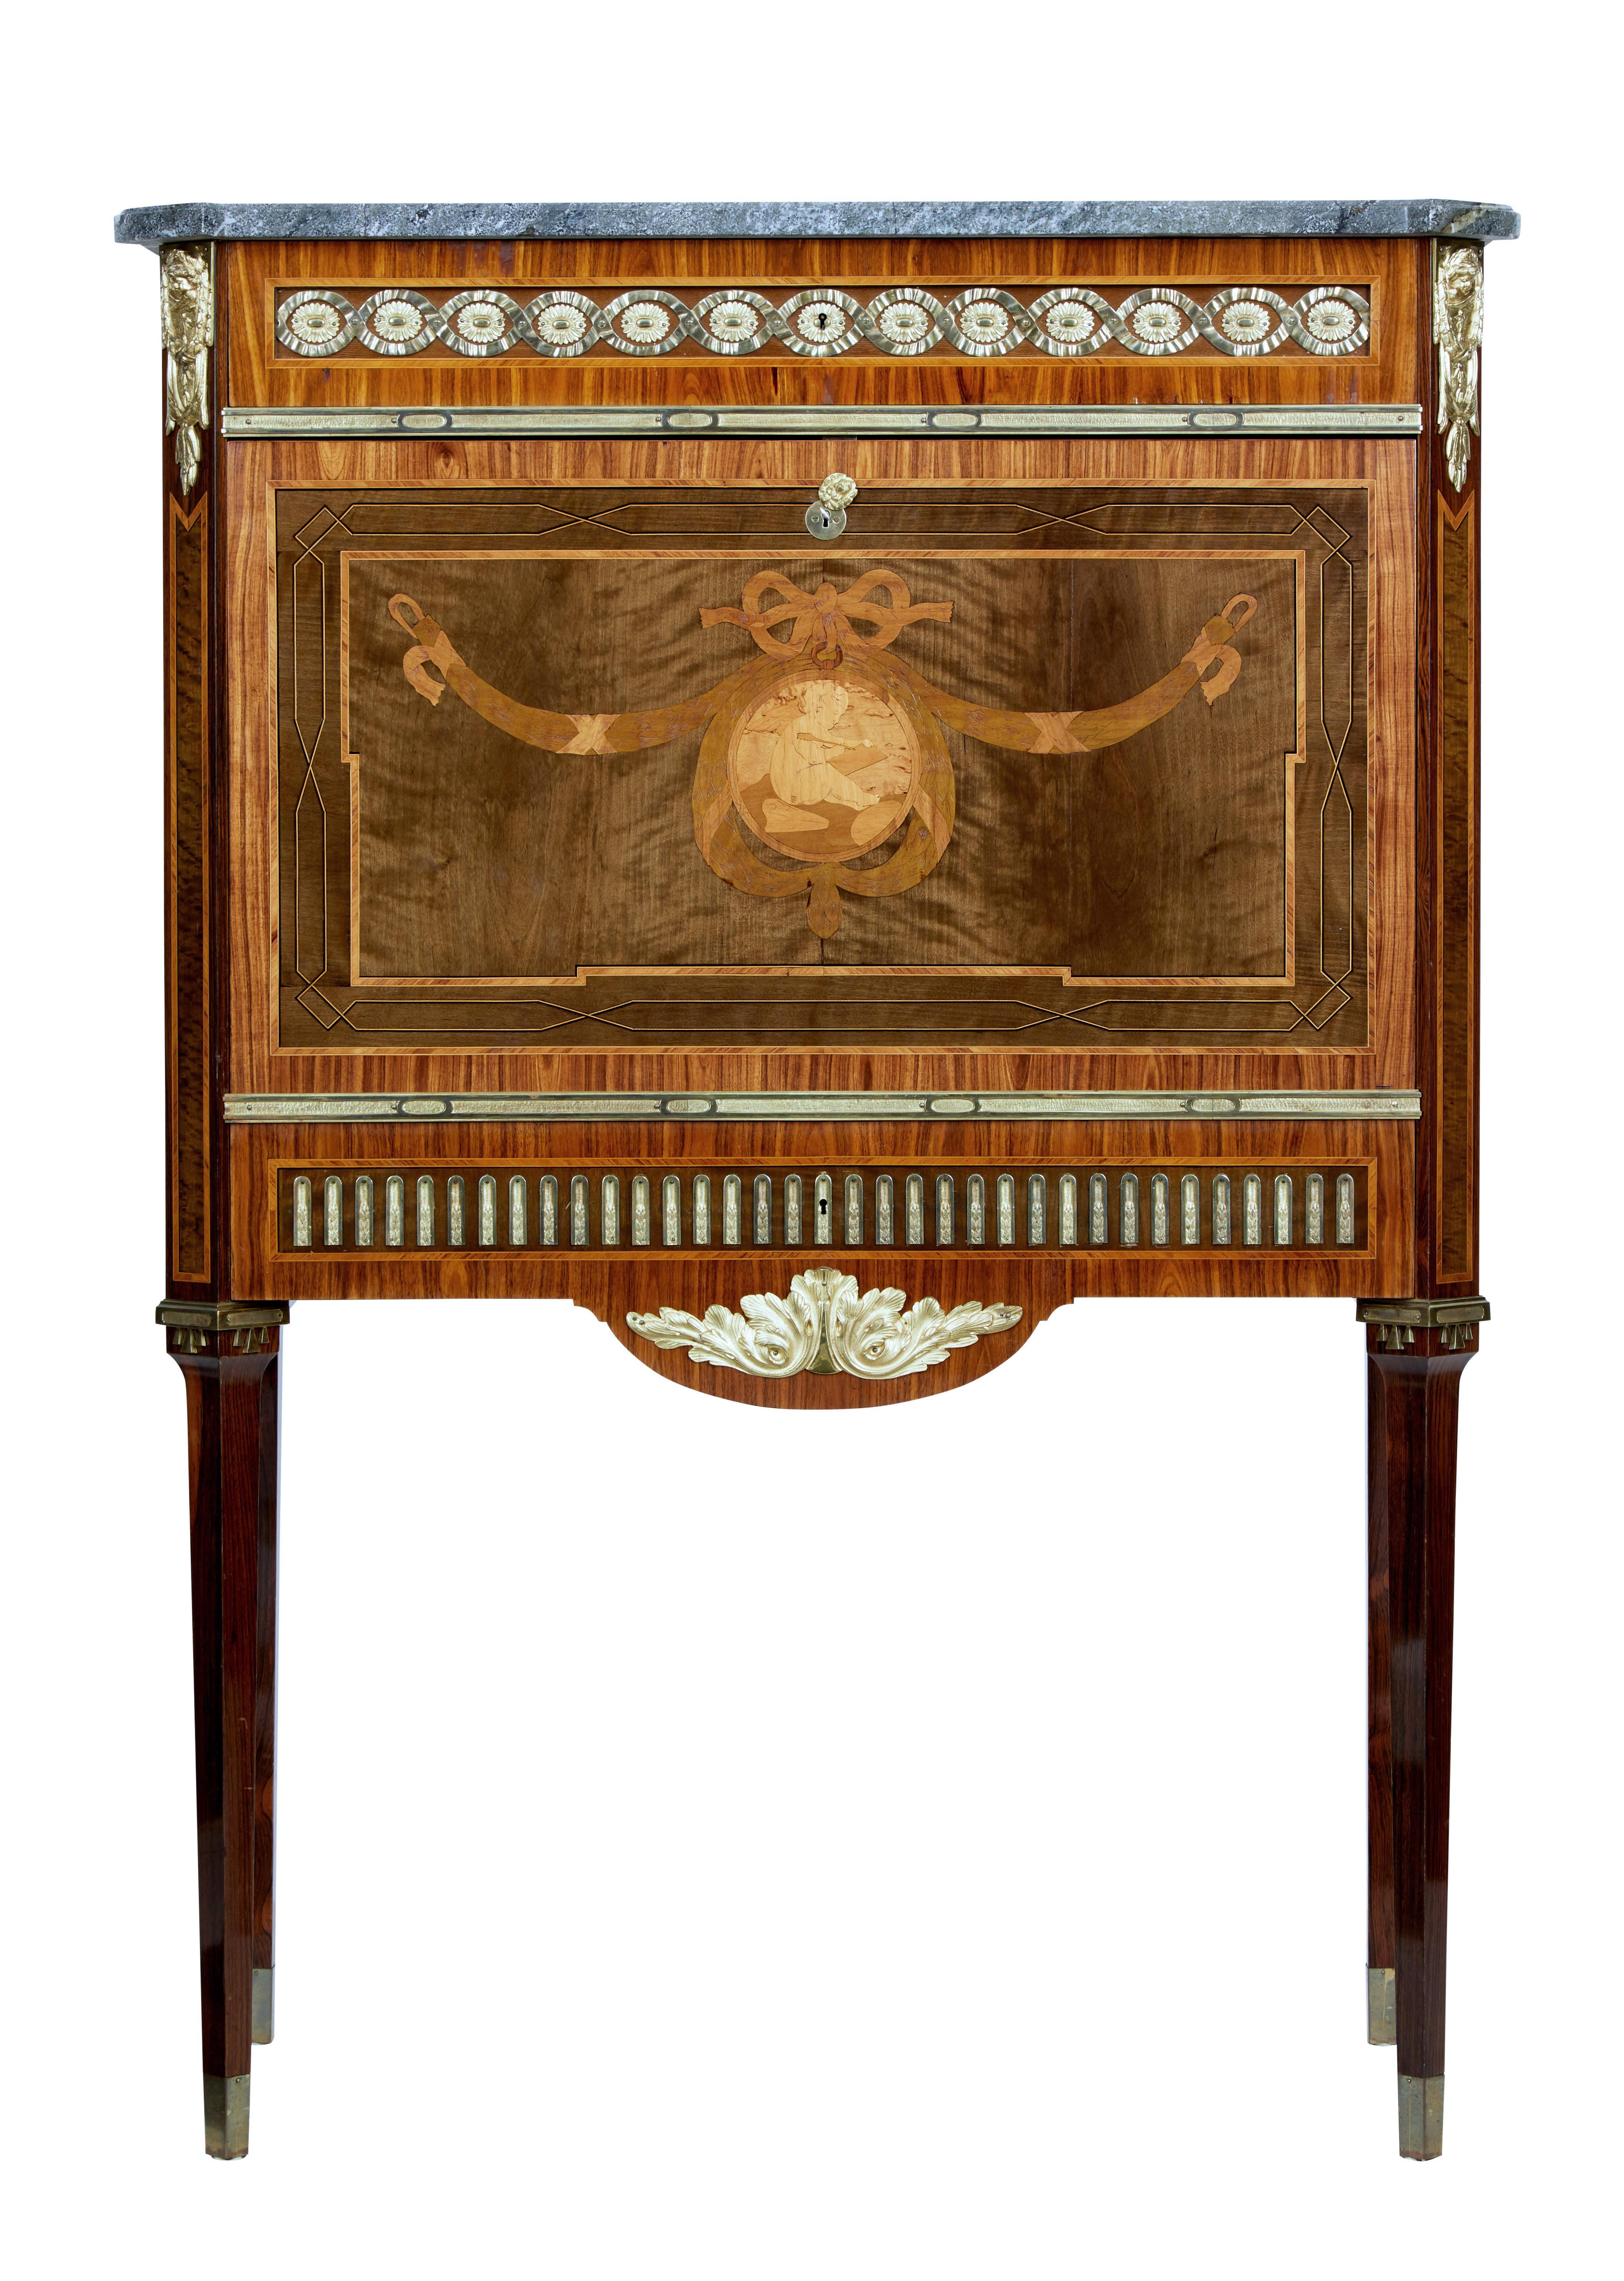 Good quality inlaid secrétaire, circa 1930.

Over sailing grey marble top with canted corners. Single drawer below the top surface crossbanded and with ormolu mounts. Profusely inlaid fall drops down to a writing height of 28 3/4